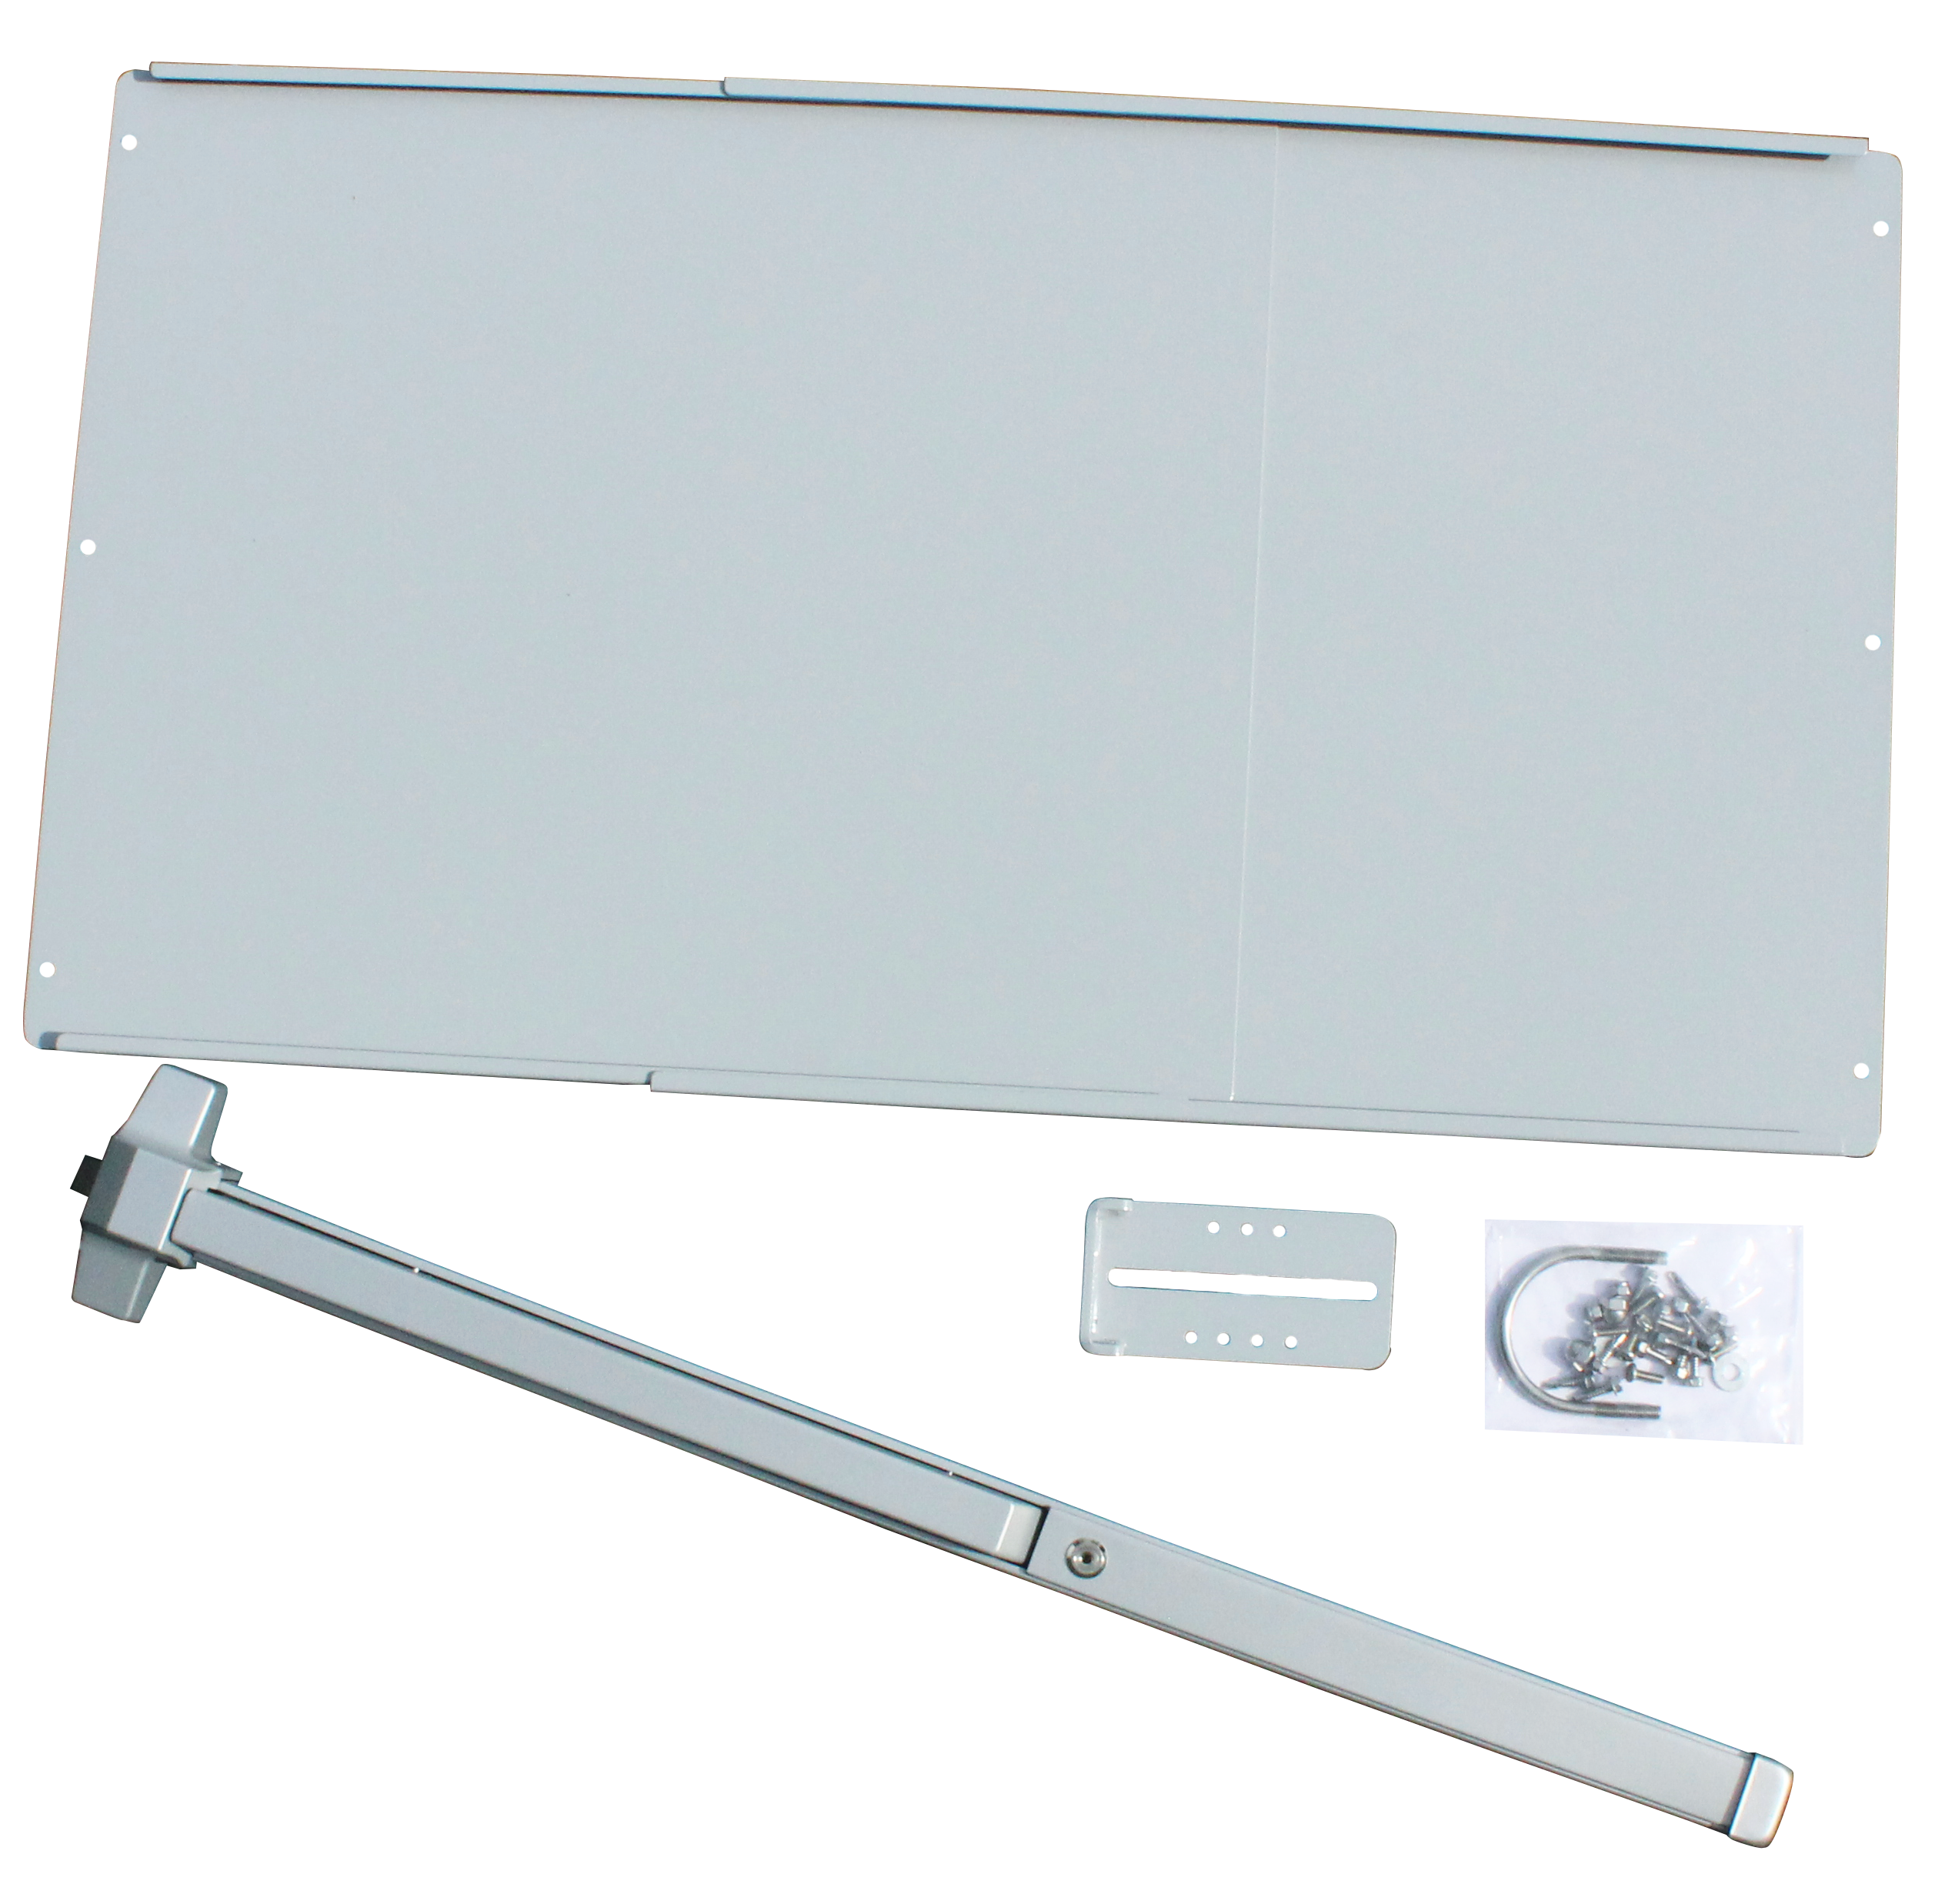 The DAC Industries Standard Panic Bar Kit is a durable product that allows for reliable installation.